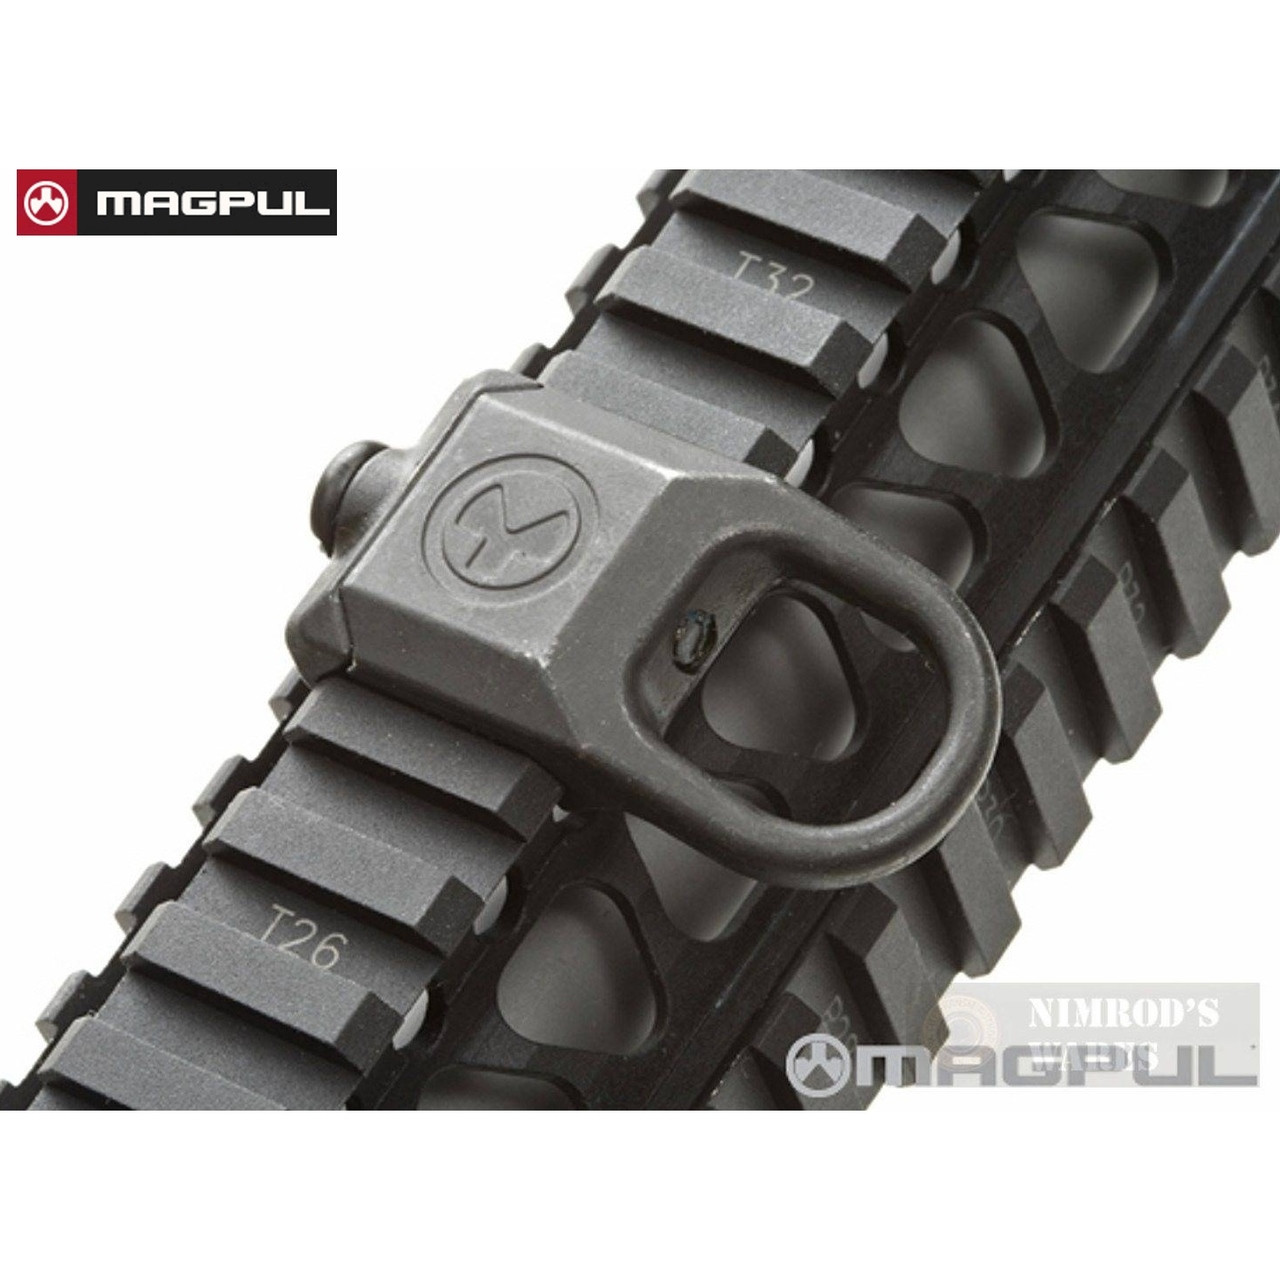 BLACK Picatinny Rail Mount Sling Attachment Point Adapter fr Magpul MS2 & MS3 